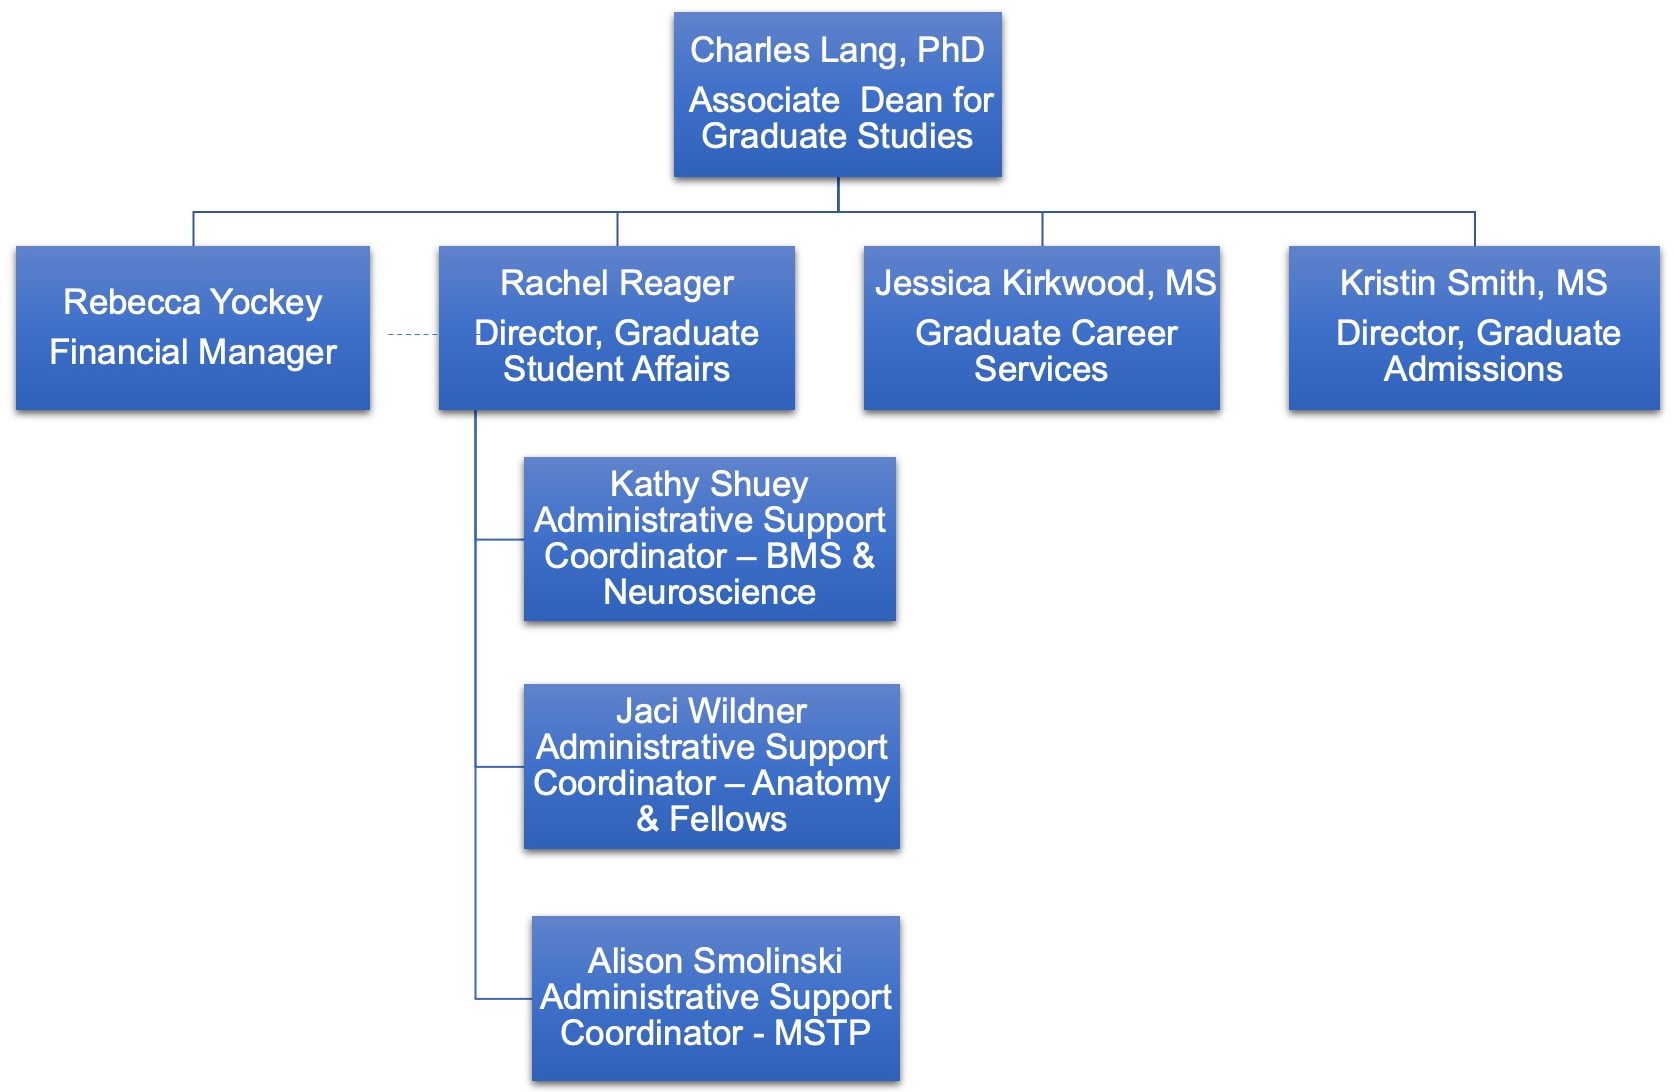 An organizational chart of the office lists Charles Lang, PhD, in the top box, with Rebecca Yockey; Rachel Reager; Jessica Kirkwood, MS; and Kristin Smith, MS, in the next level, all reporting to Lang. Reager has a dotted line to Yockey. Reporting to Reager in boxes below are Kathy Shuey, Jaci Wildner and Alison Smolinski.